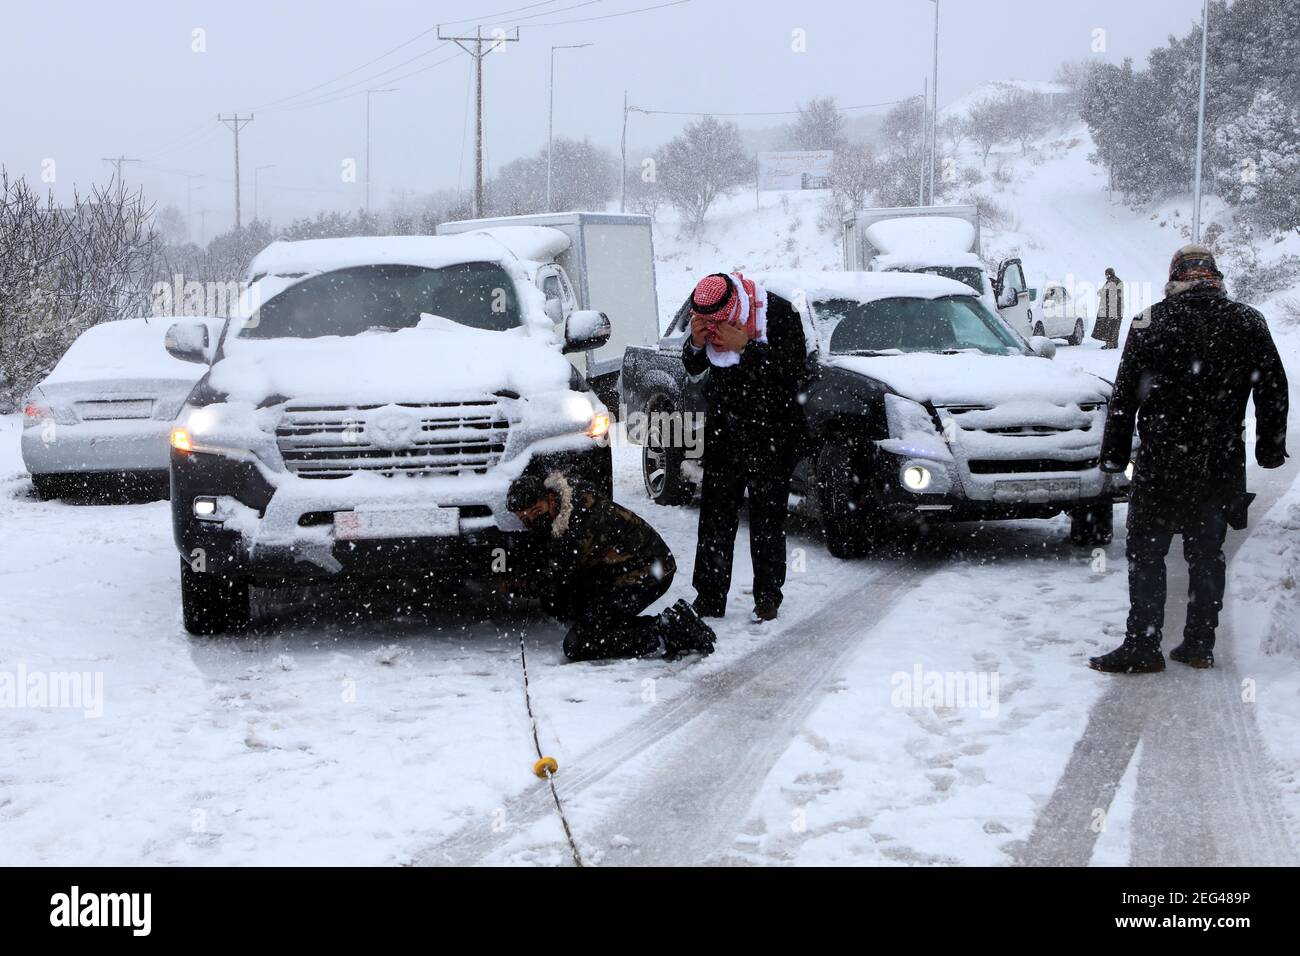 Ajloun, Jordan. 17th Feb, 2021. People check a car stuck in snow in Ajloun, Jordan, on Feb. 17, 2021. A snowstorm on Wednesday hit Jordan's mountainous areas accompanied by heavy winds and cold weather. Credit: Mohammad Abu Ghosh/Xinhua/Alamy Live News Stock Photo